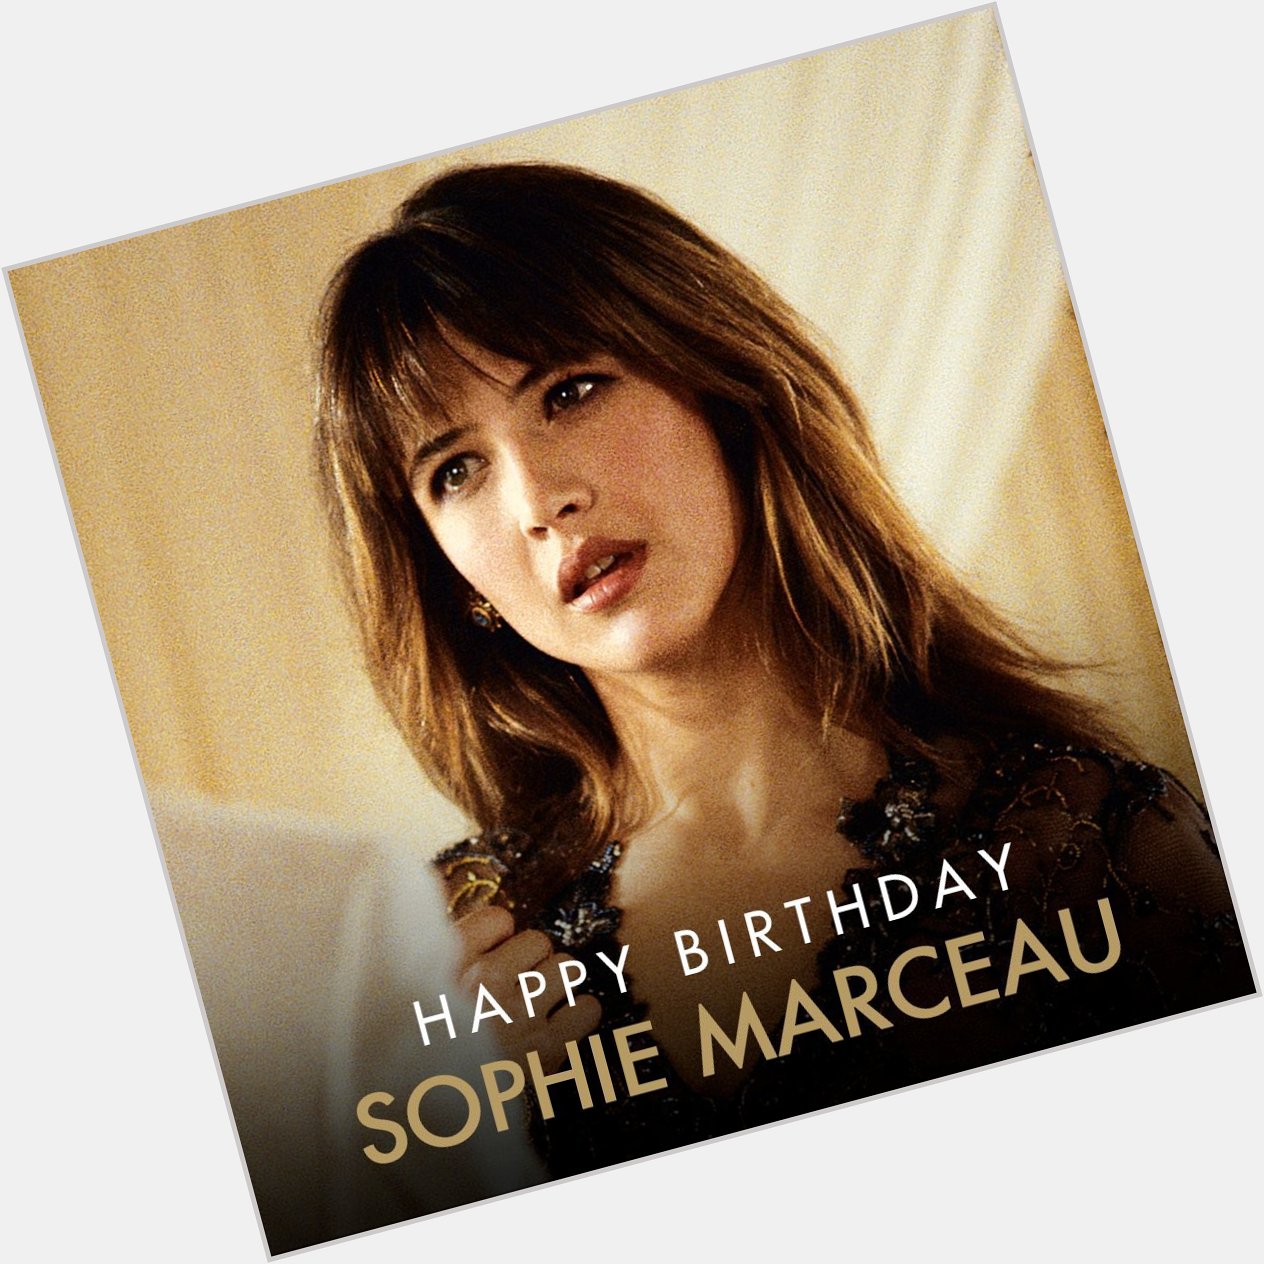 Wishing the stunning Sophie Marceau a happy birthday  